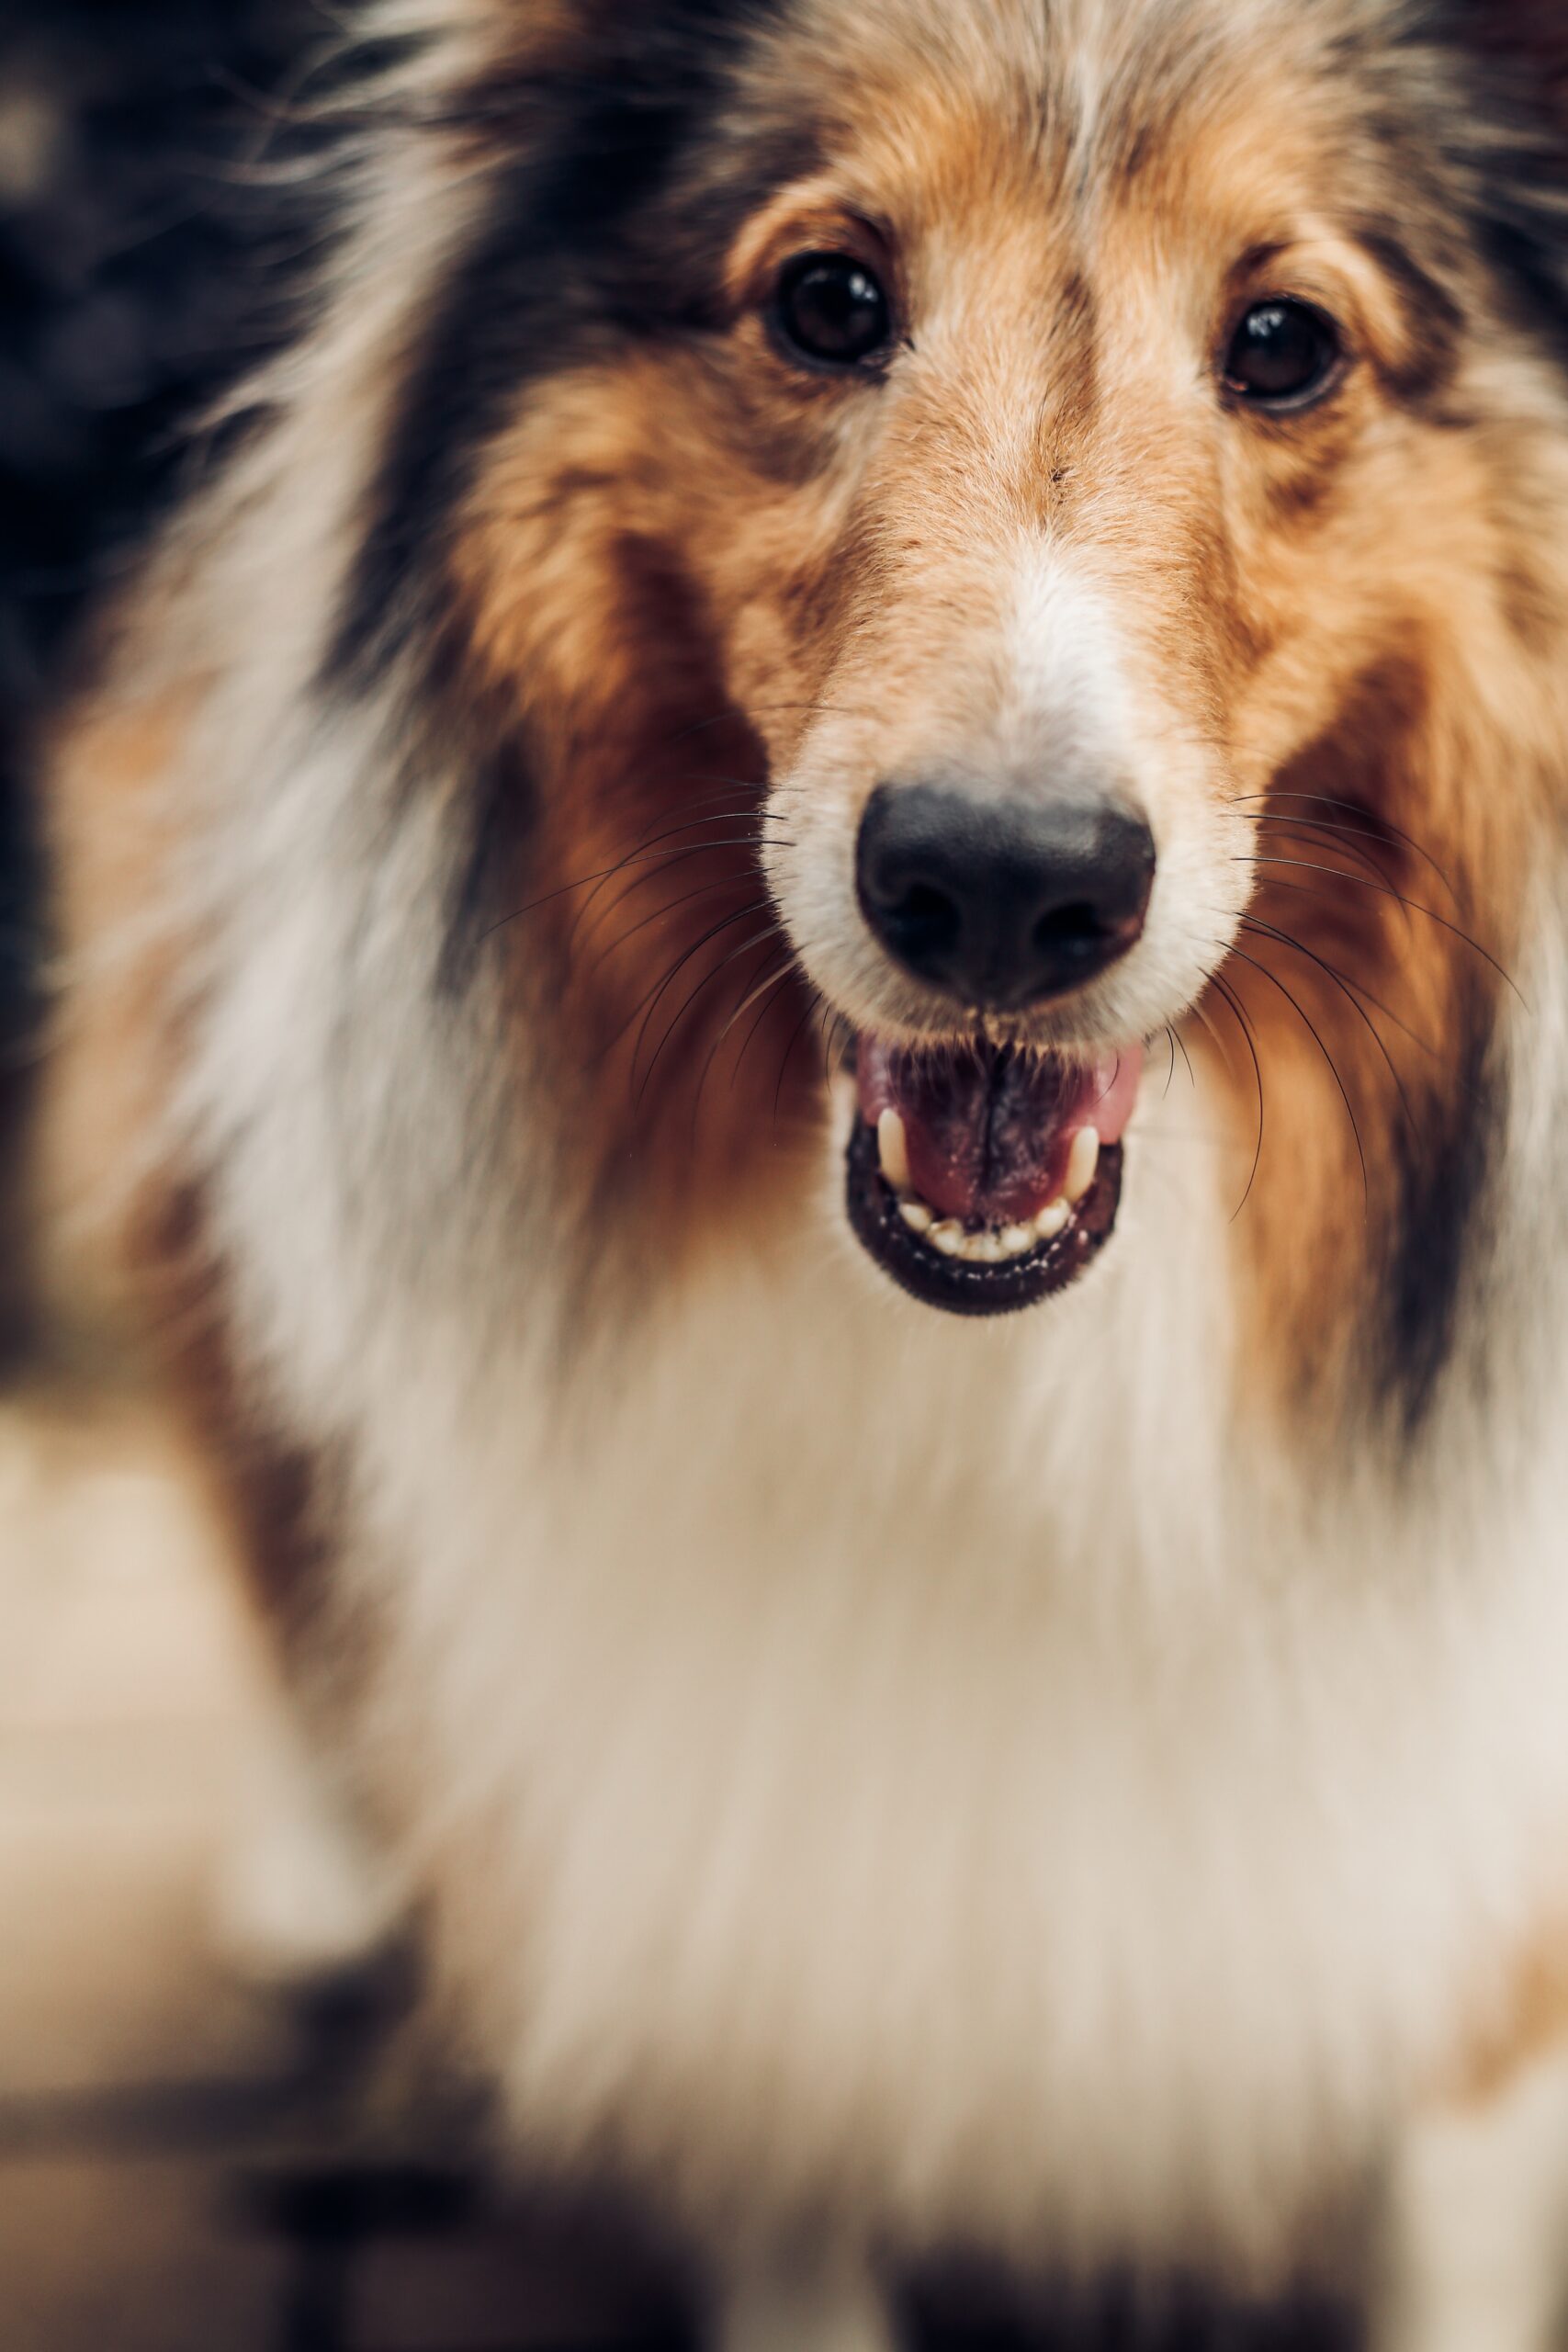 What are the most intelligent dog breeds?